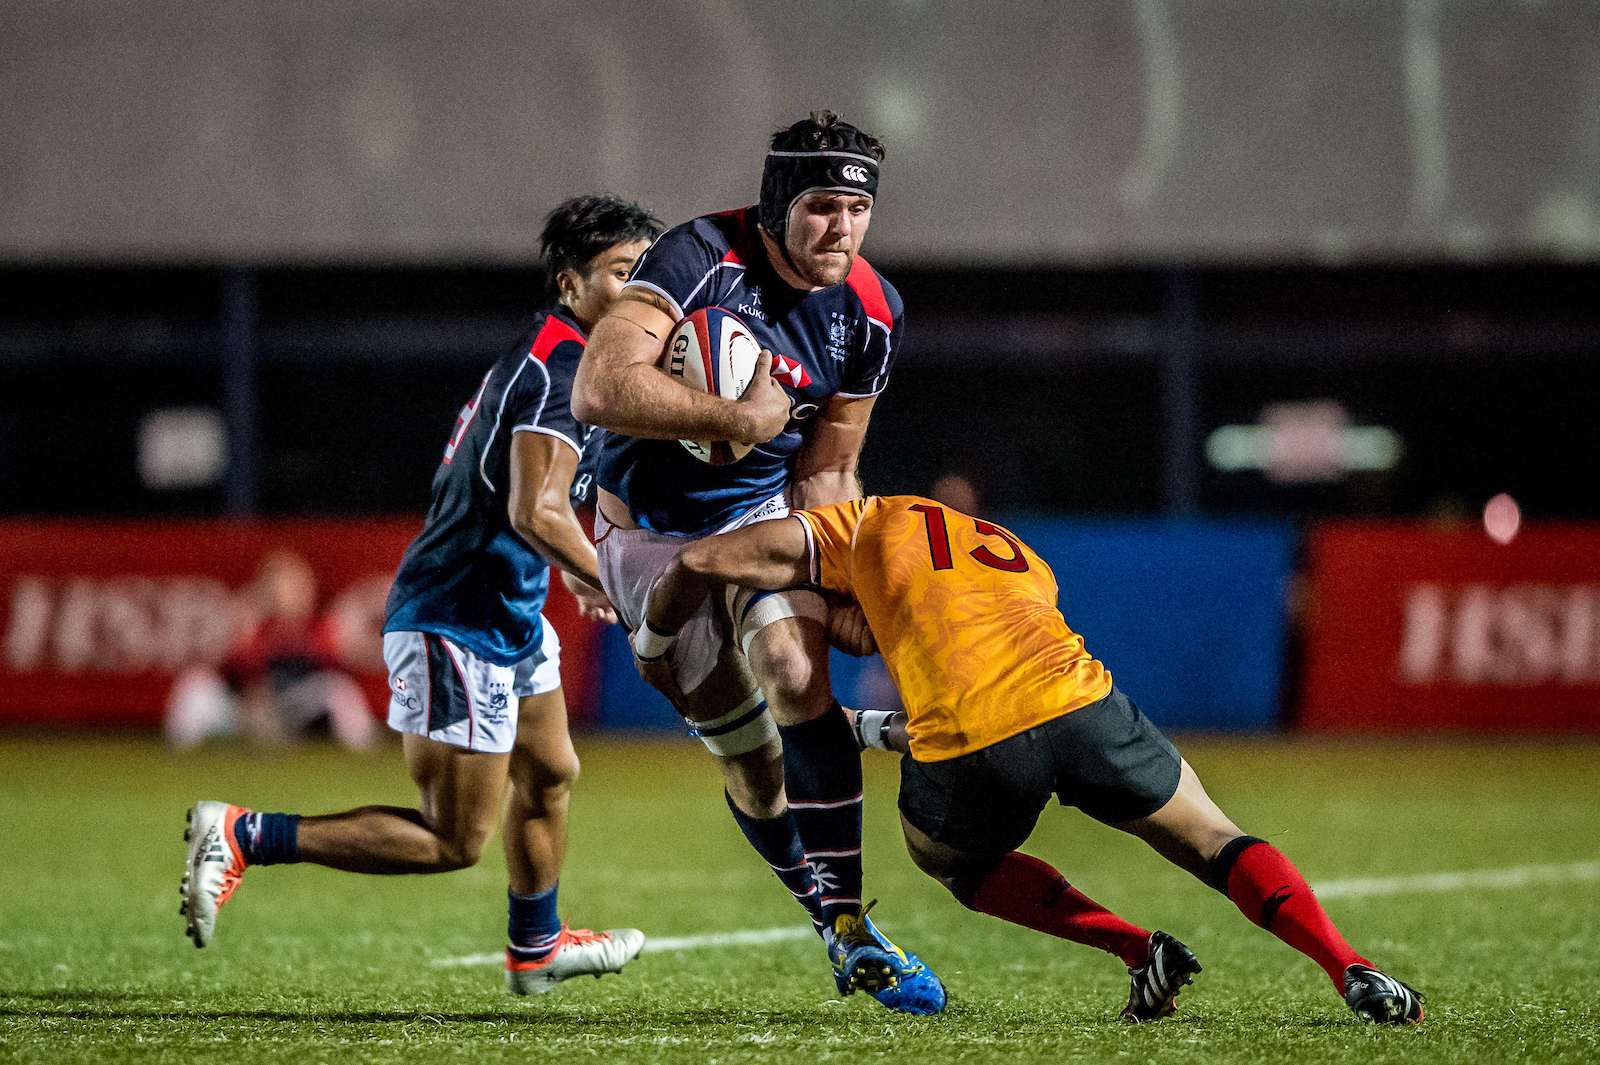 Dan Falvey takes on a tackler in Hong Kong’s win over Papua New Guinea in the Cup of Nations. Photo: SCMP Pictures